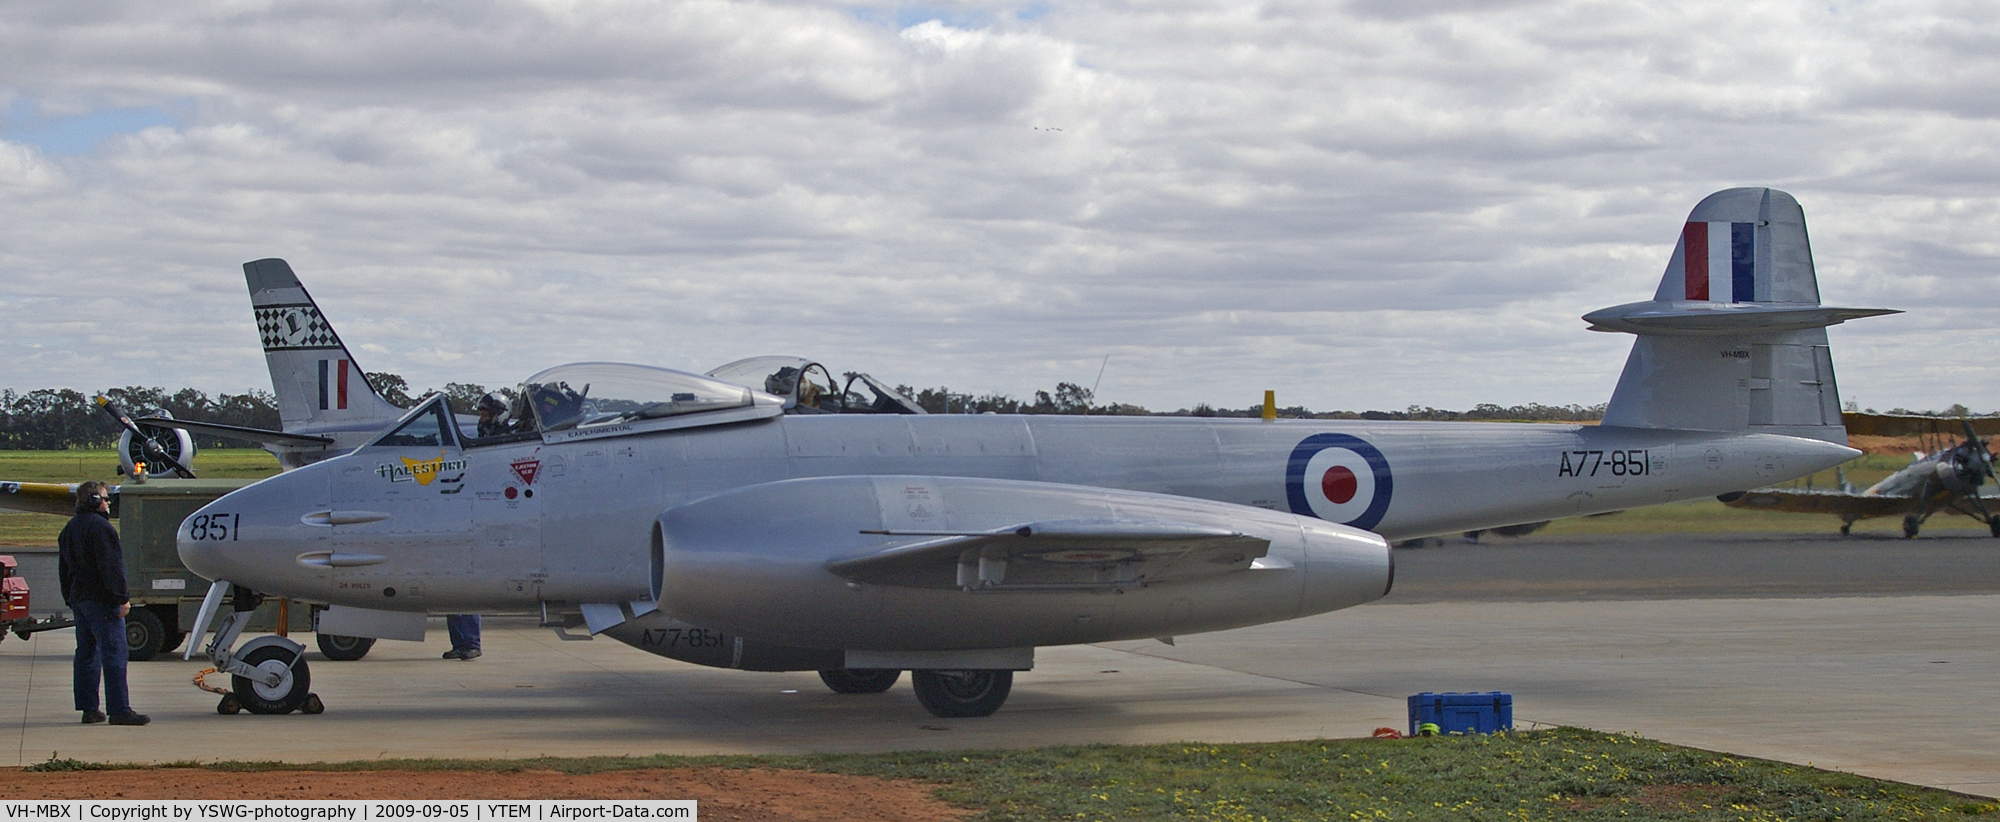 VH-MBX, 1950 Gloster Meteor F.8 C/N G5/361641, Former RAF Gloster Meteor (c/n G5/361641) F.8 now painted up as RAAF A77-851 (Halestorm), which is the only flying Gloster Meteor f.8 in the world, at Temora Aviation Museum.